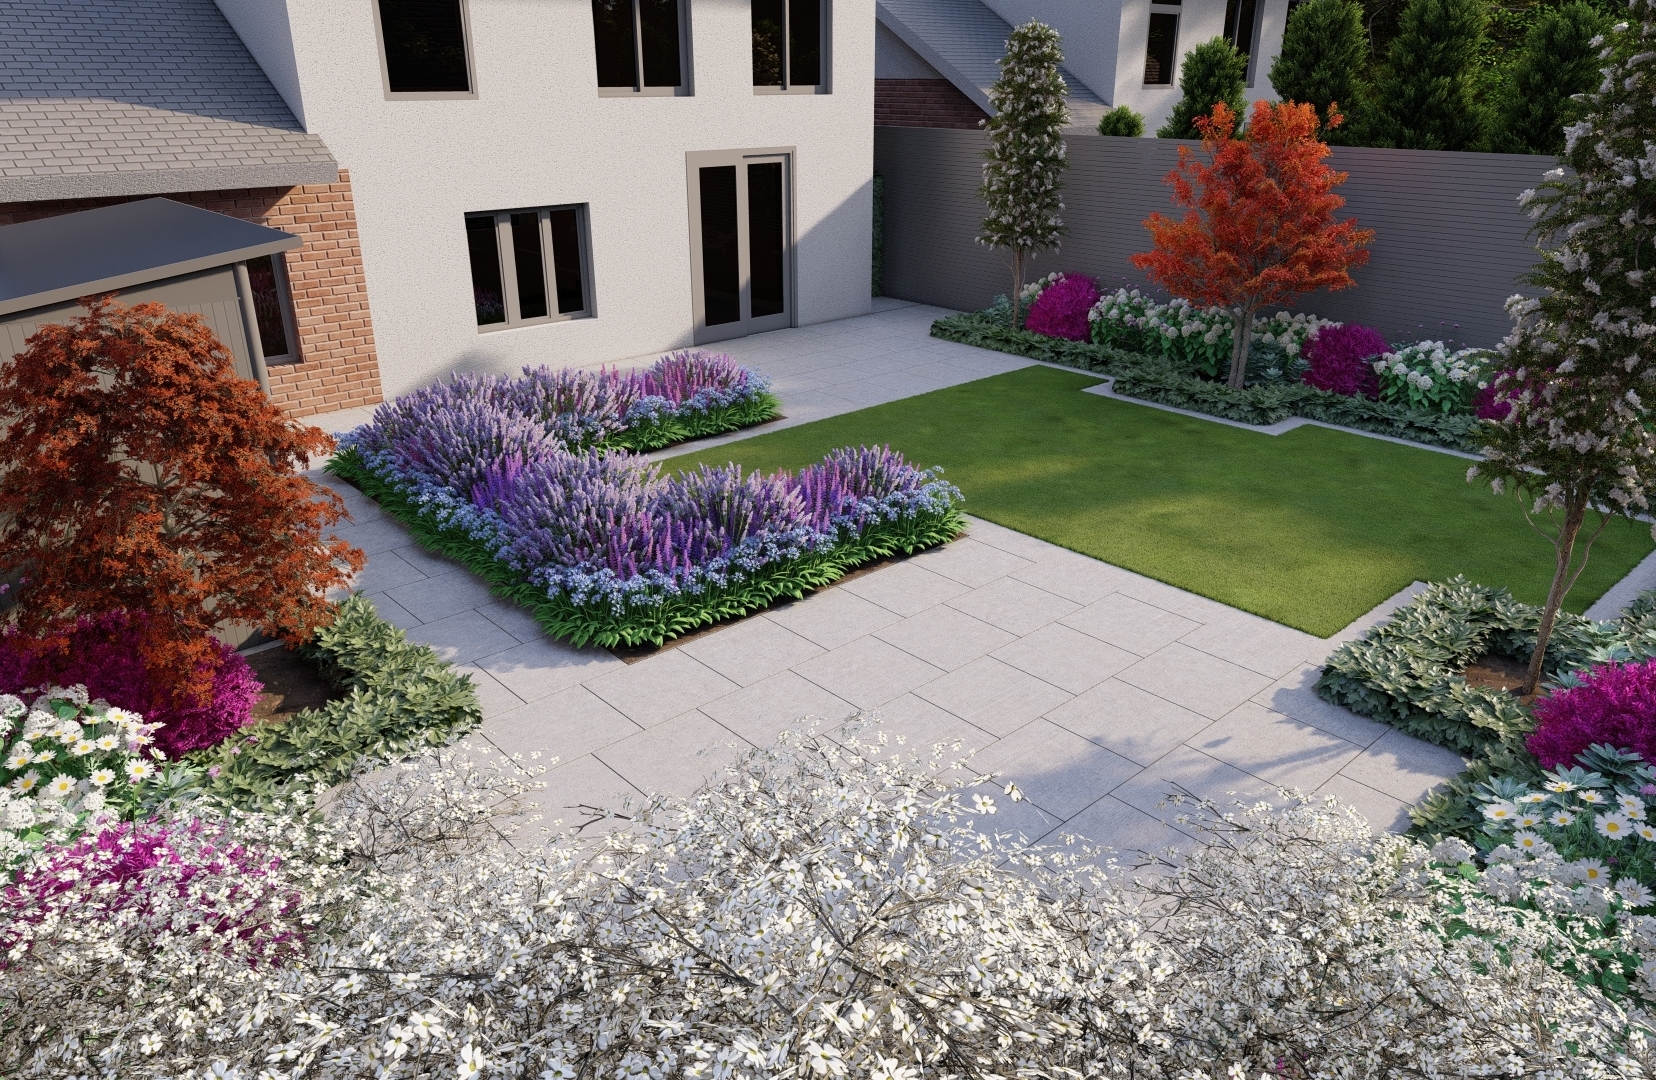 Colourful yet low maintenance planting schemes are a feature of this Family Garden Design in Dunshaughlin, Co Meath | Owen Chubb Garden Landscapers, Tel 087-2306128